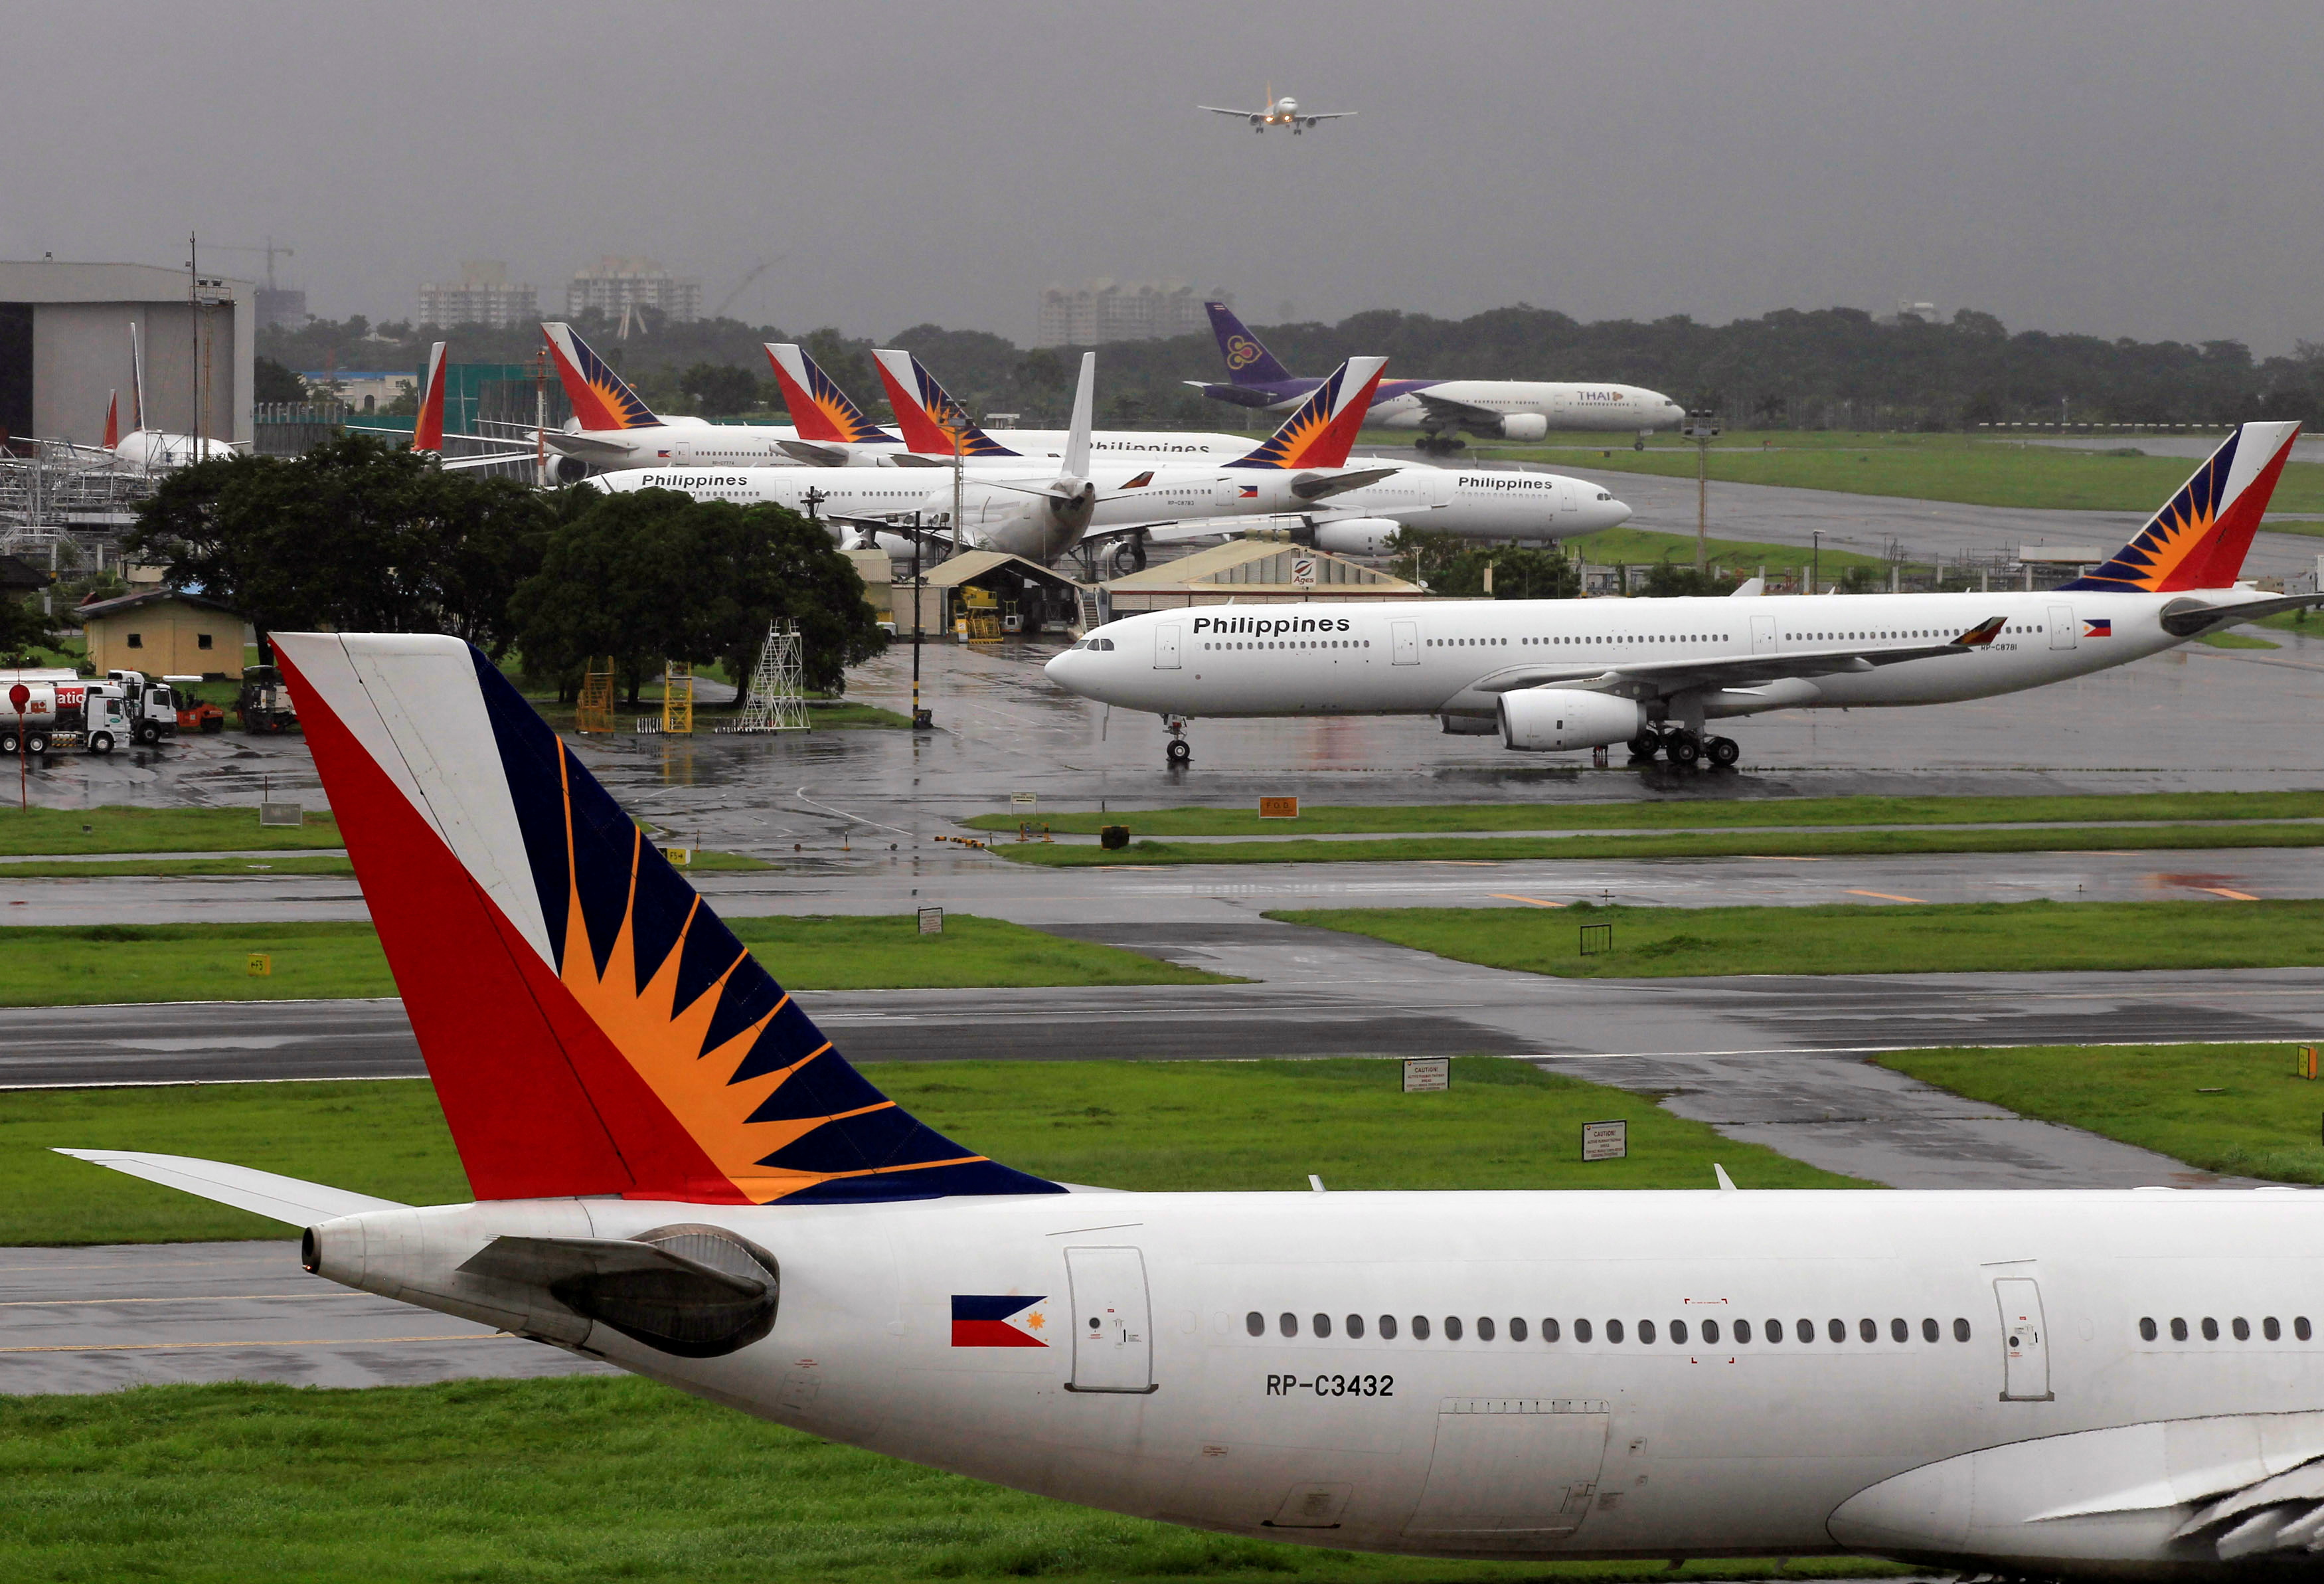 Philippine Airlines planes are seen parked on tarmac in Manila International Airport in Pasay city, metro Manila